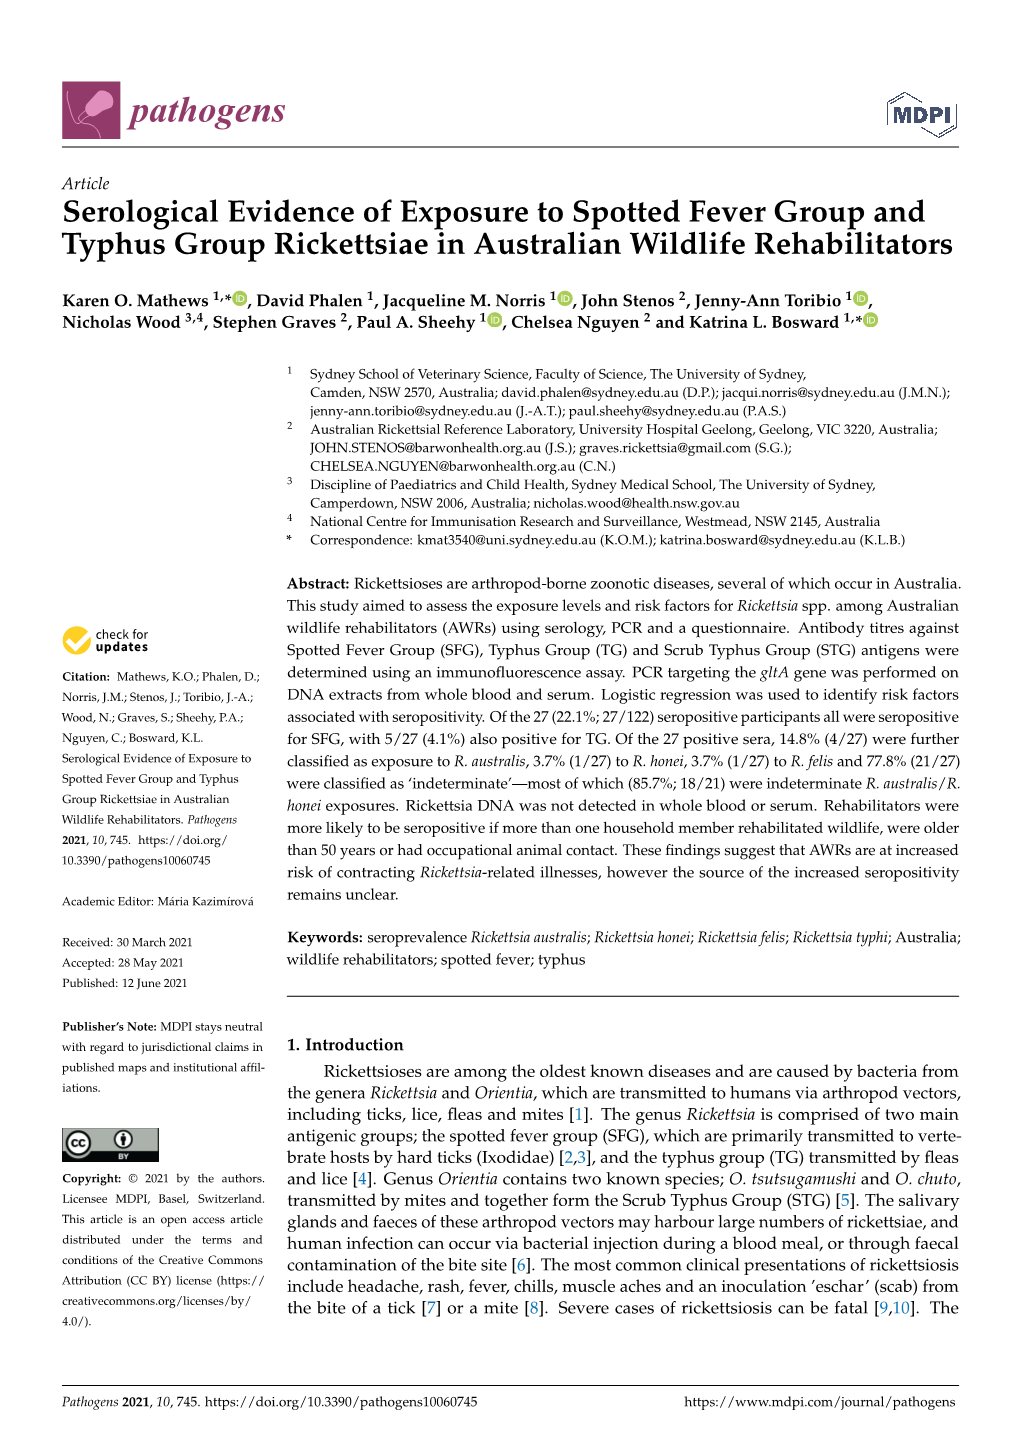 Serological Evidence of Exposure to Spotted Fever Group and Typhus Group Rickettsiae in Australian Wildlife Rehabilitators